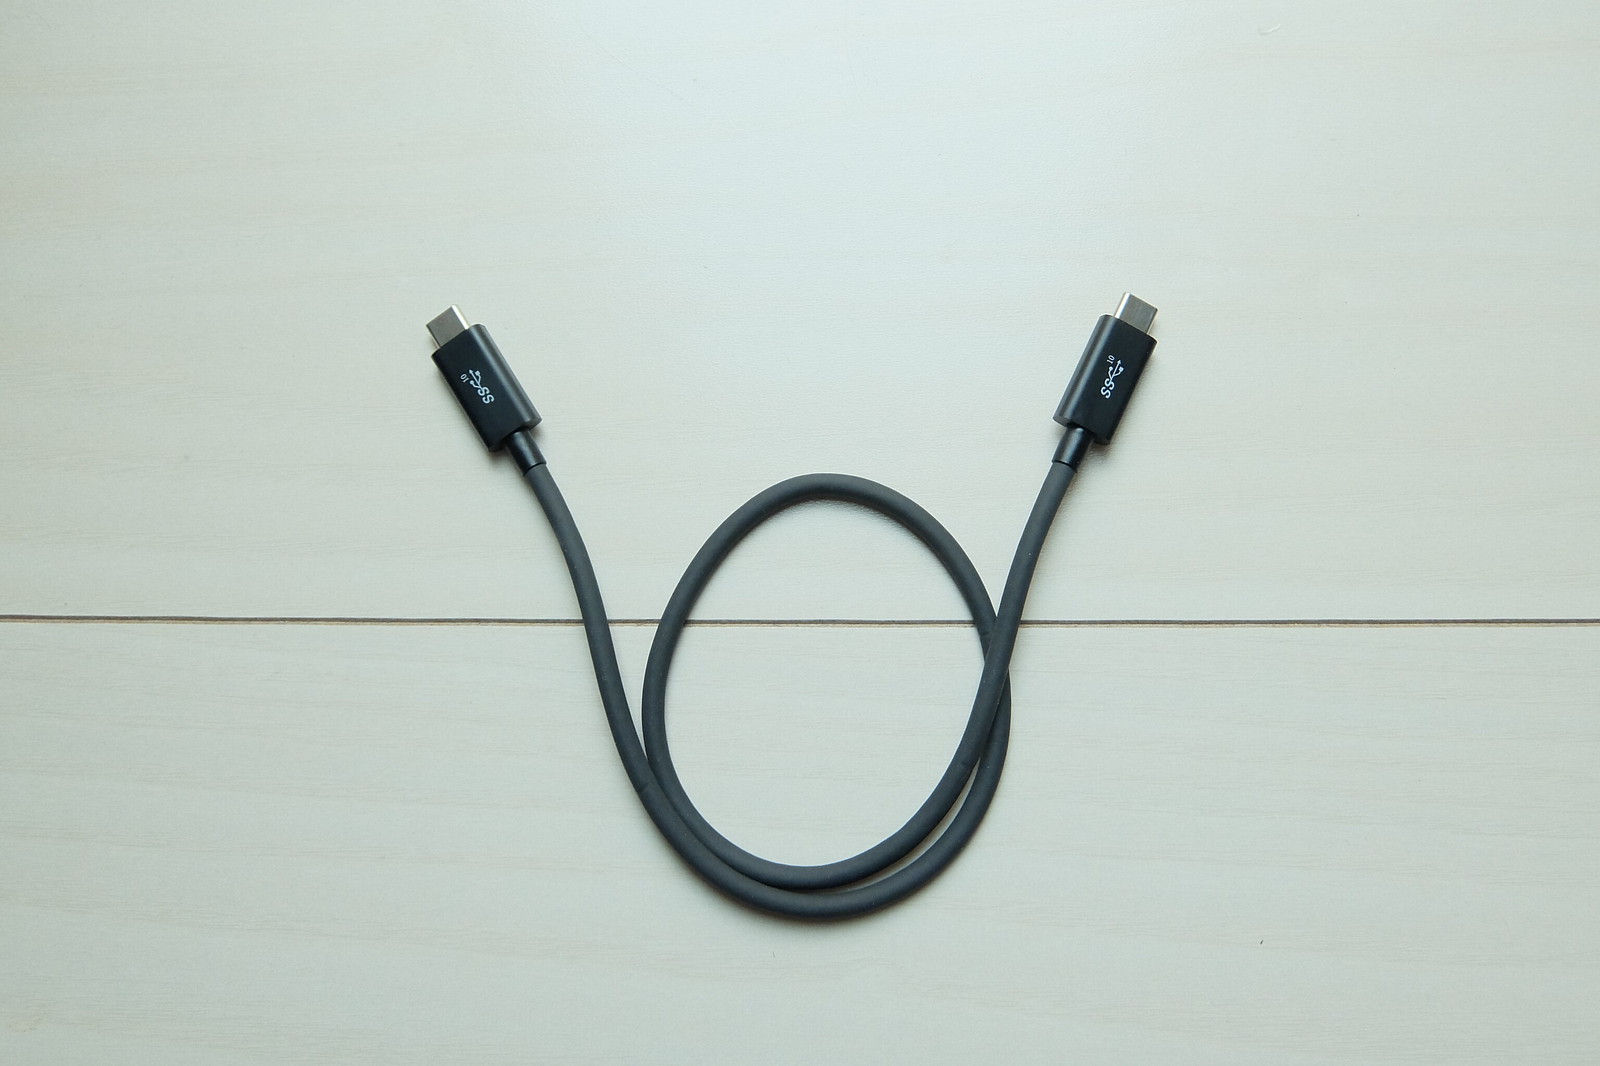 BUFFALO USB3.1 Gen2 Cable (C to C)